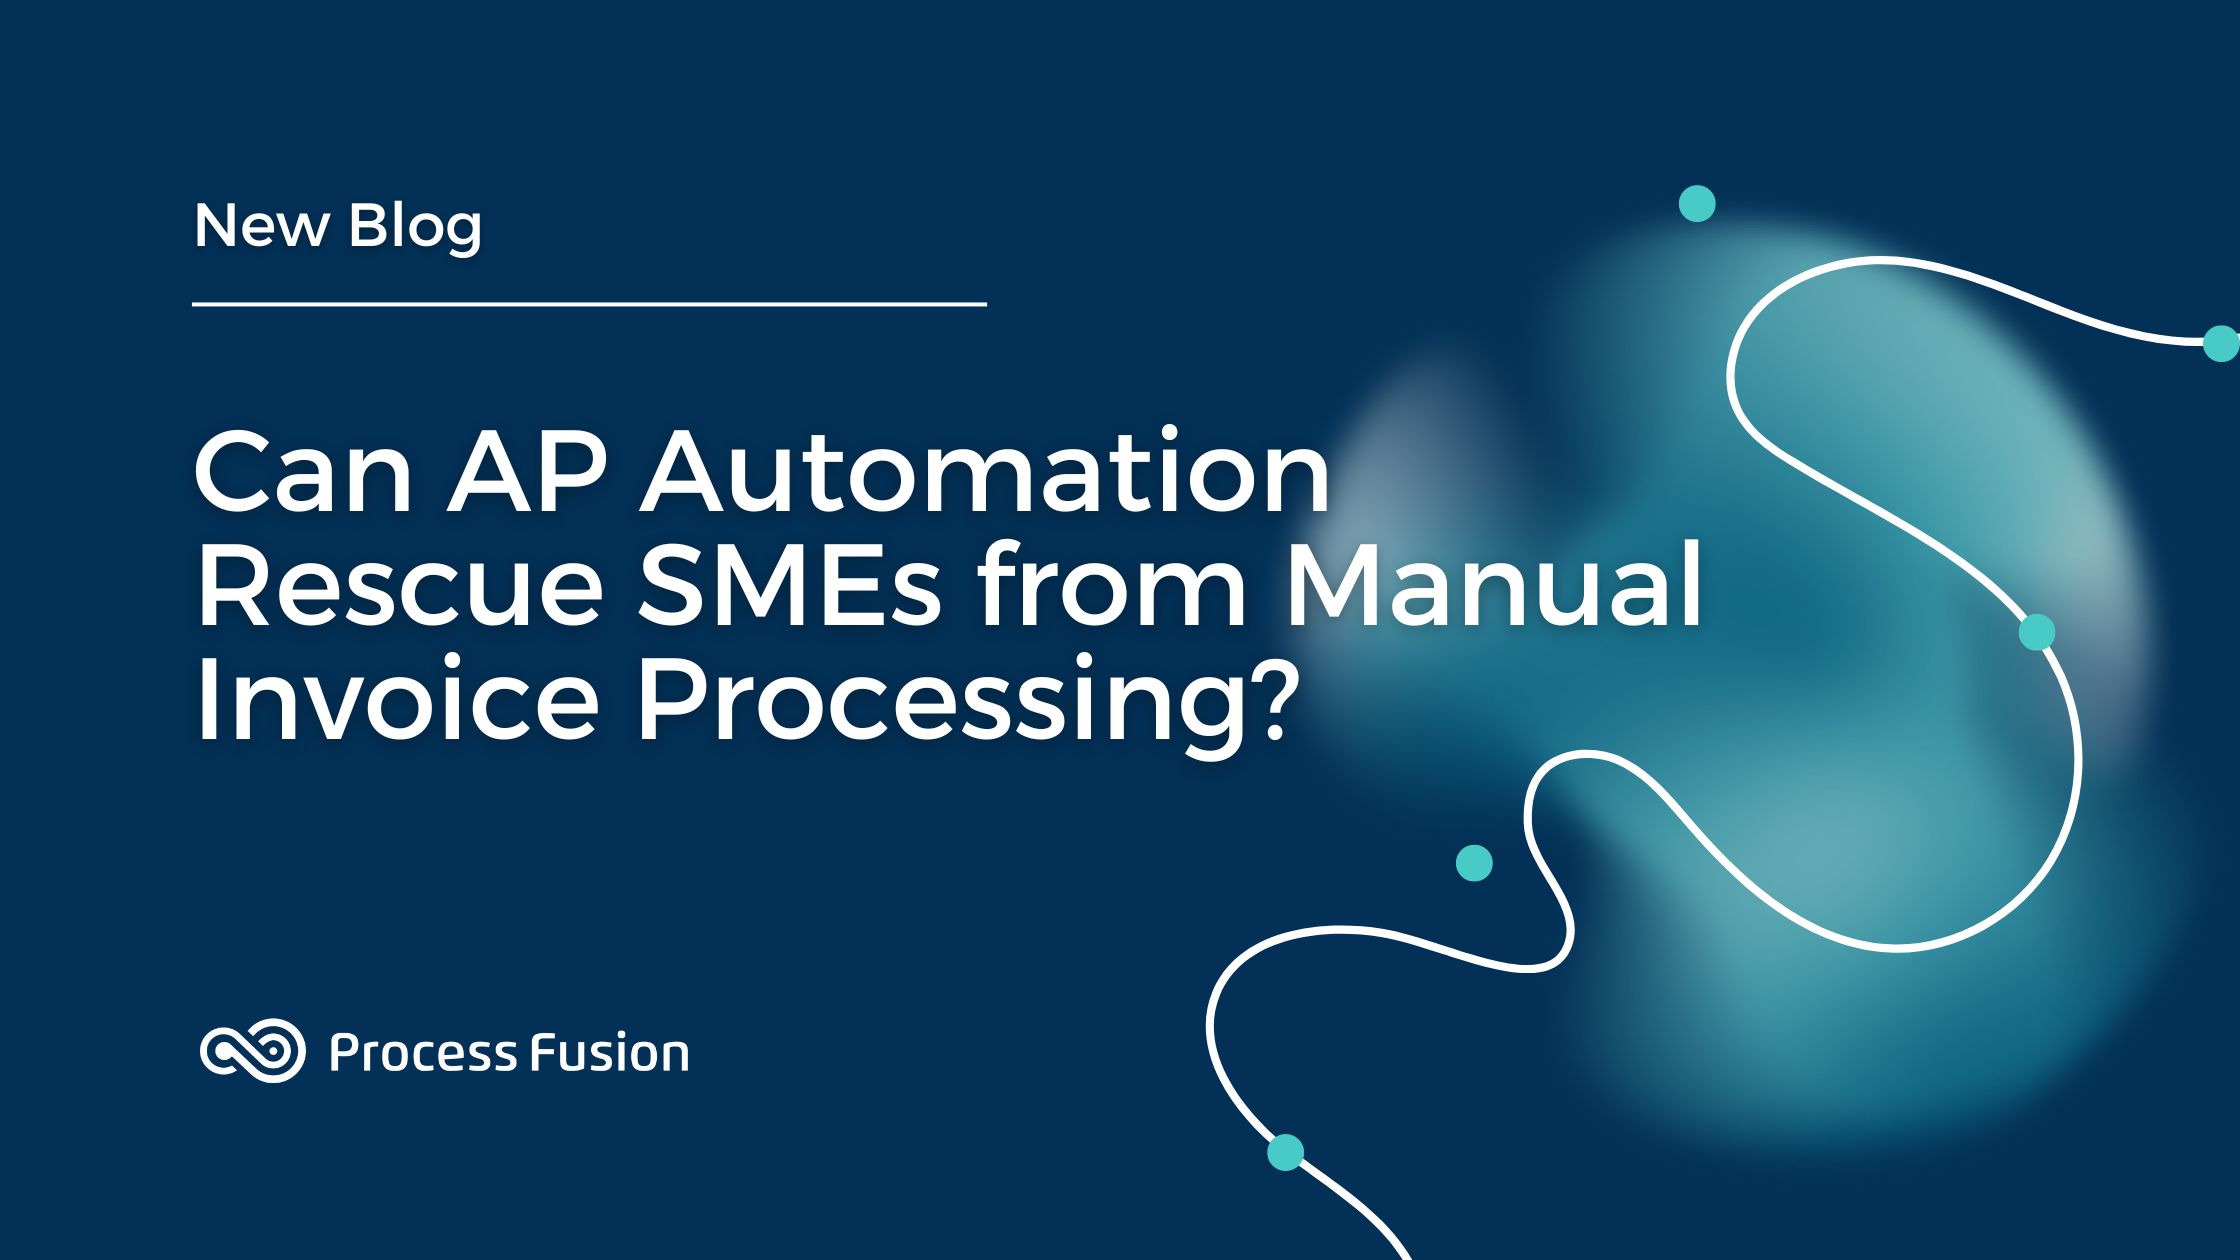 Can AP Automation Rescue SMEs from Manual Invoice Processing?